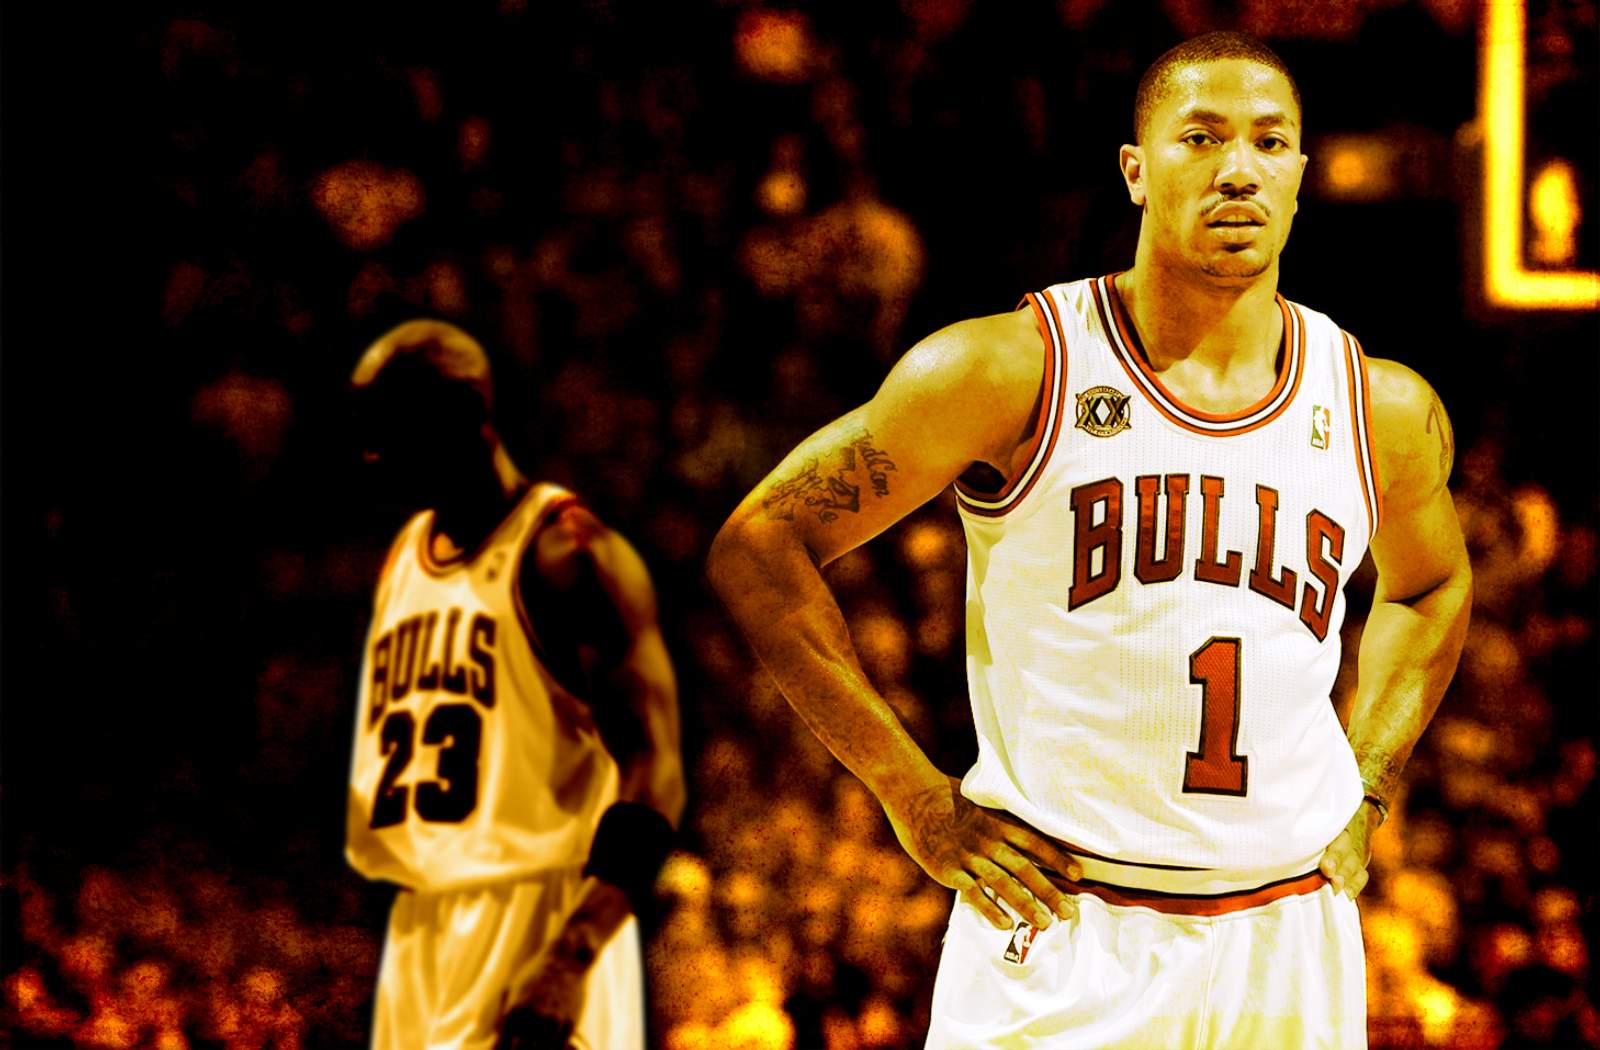 basketball quotes derrick rose